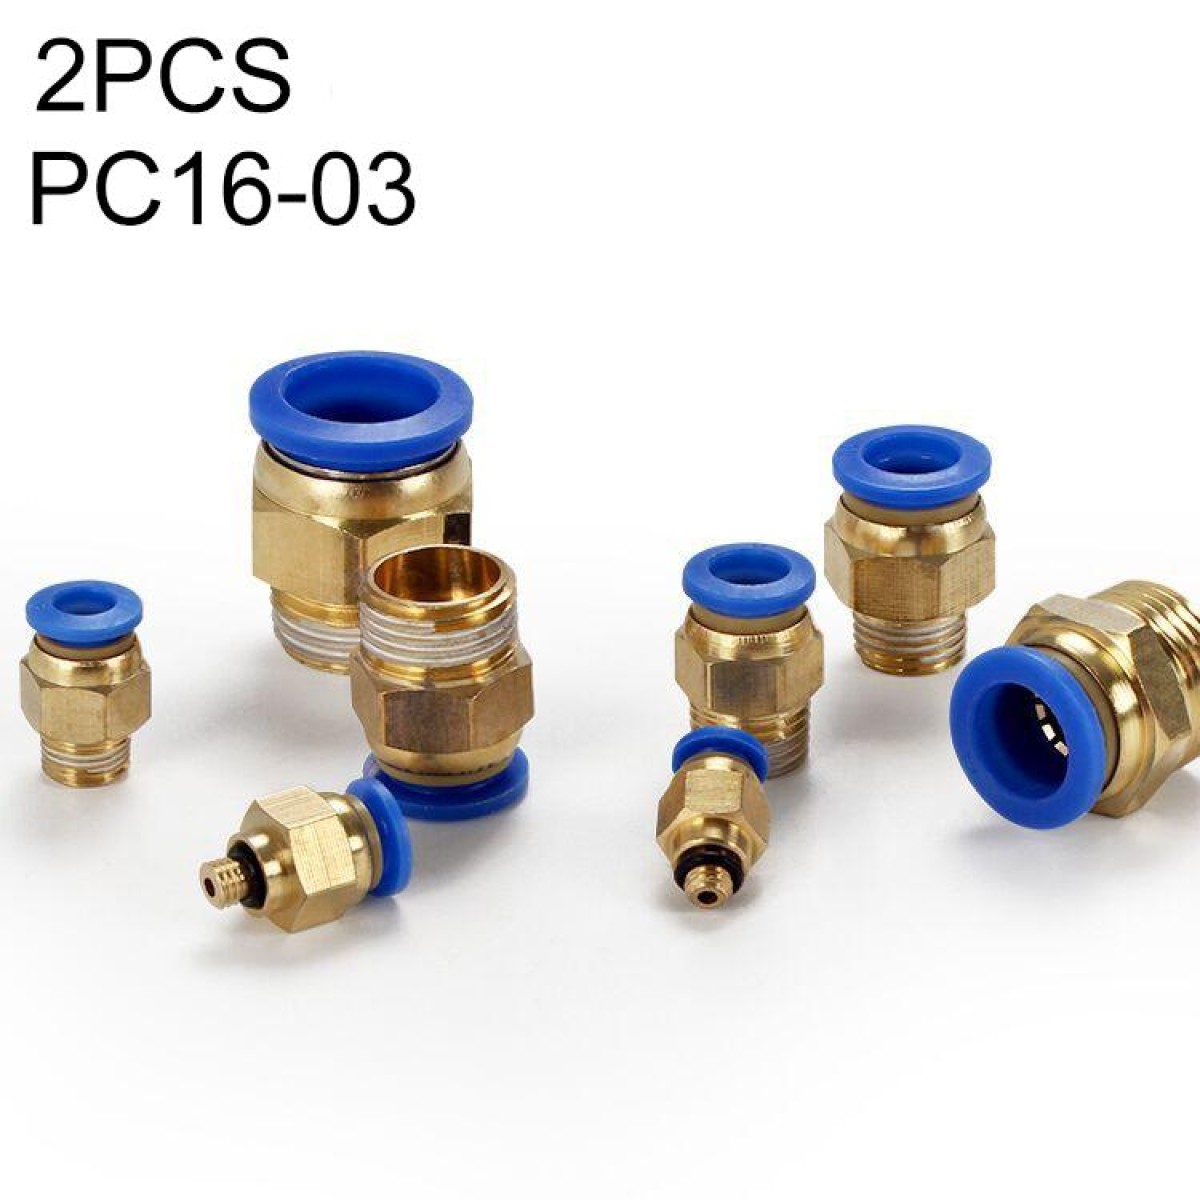 PC16-03 LAIZE 2pcs PC Male Thread Straight Pneumatic Quick Fitting Connector